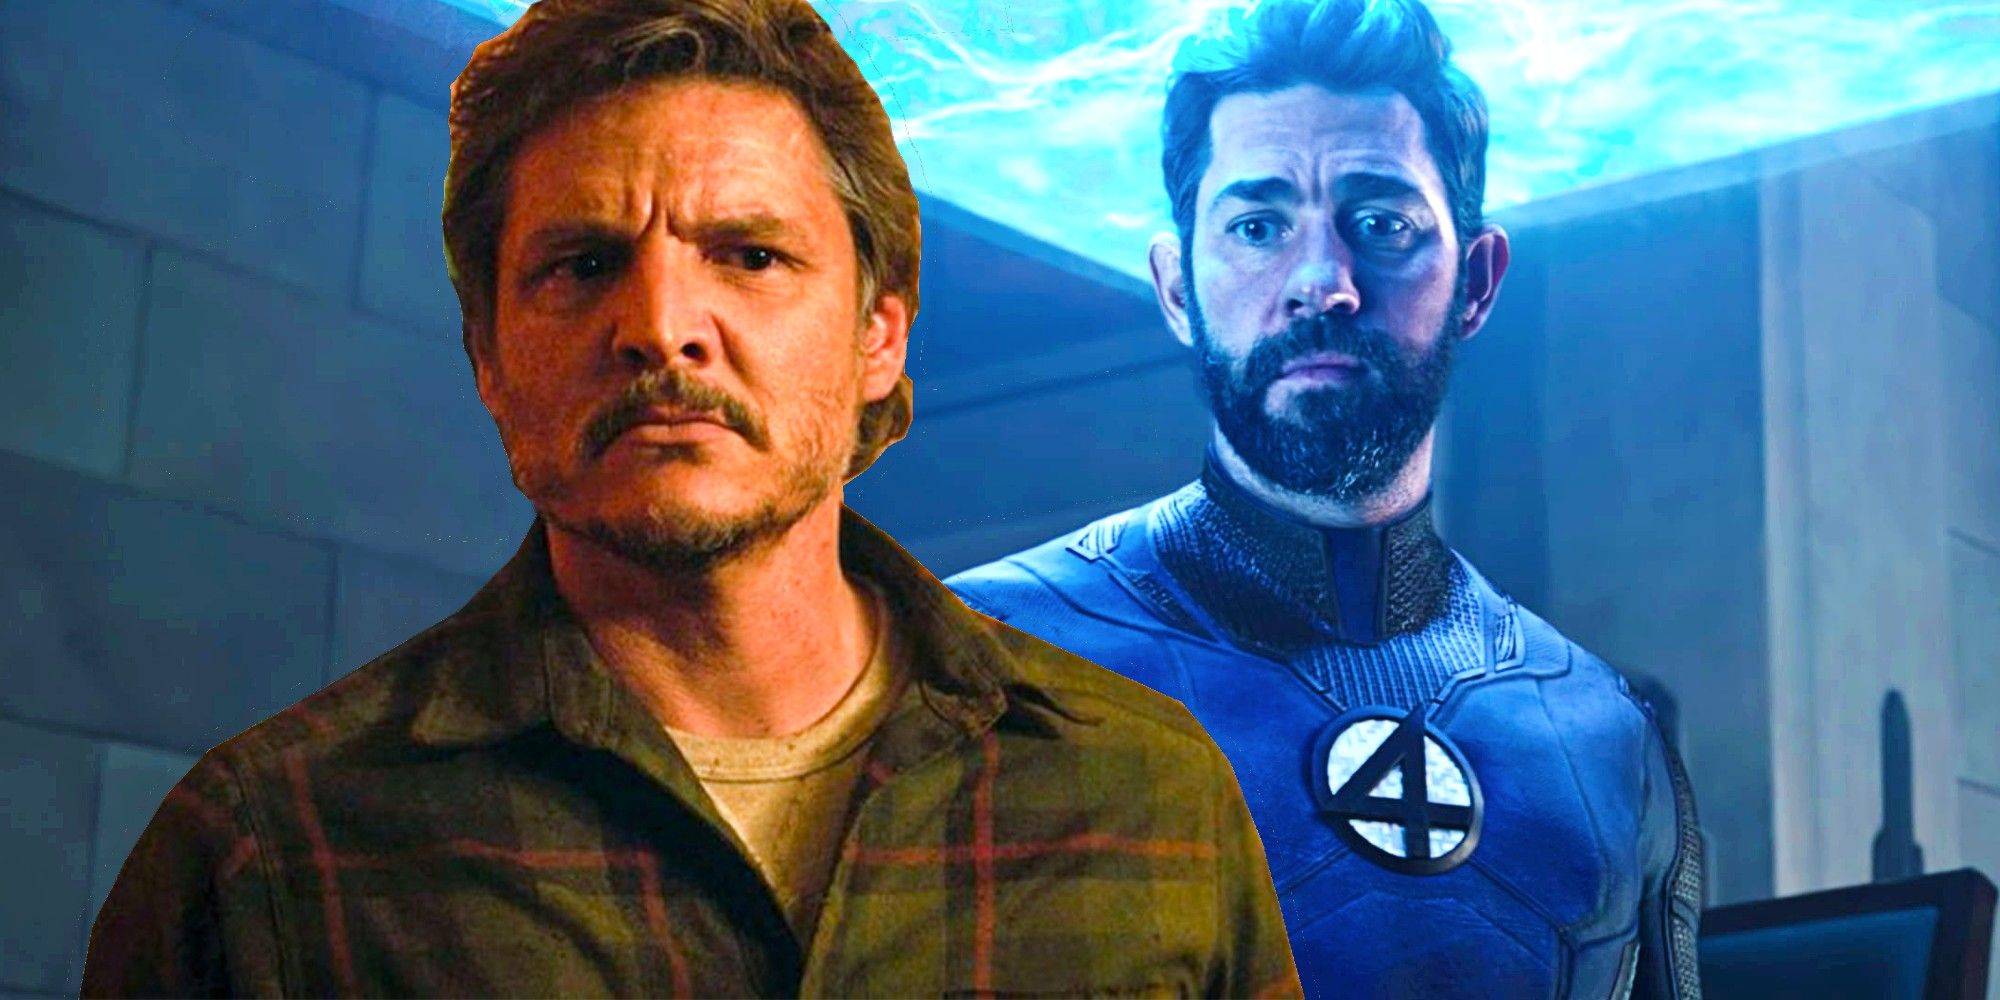 Composite Of Pedro Pascal And John Krasinski as Reed Richards In The MCU